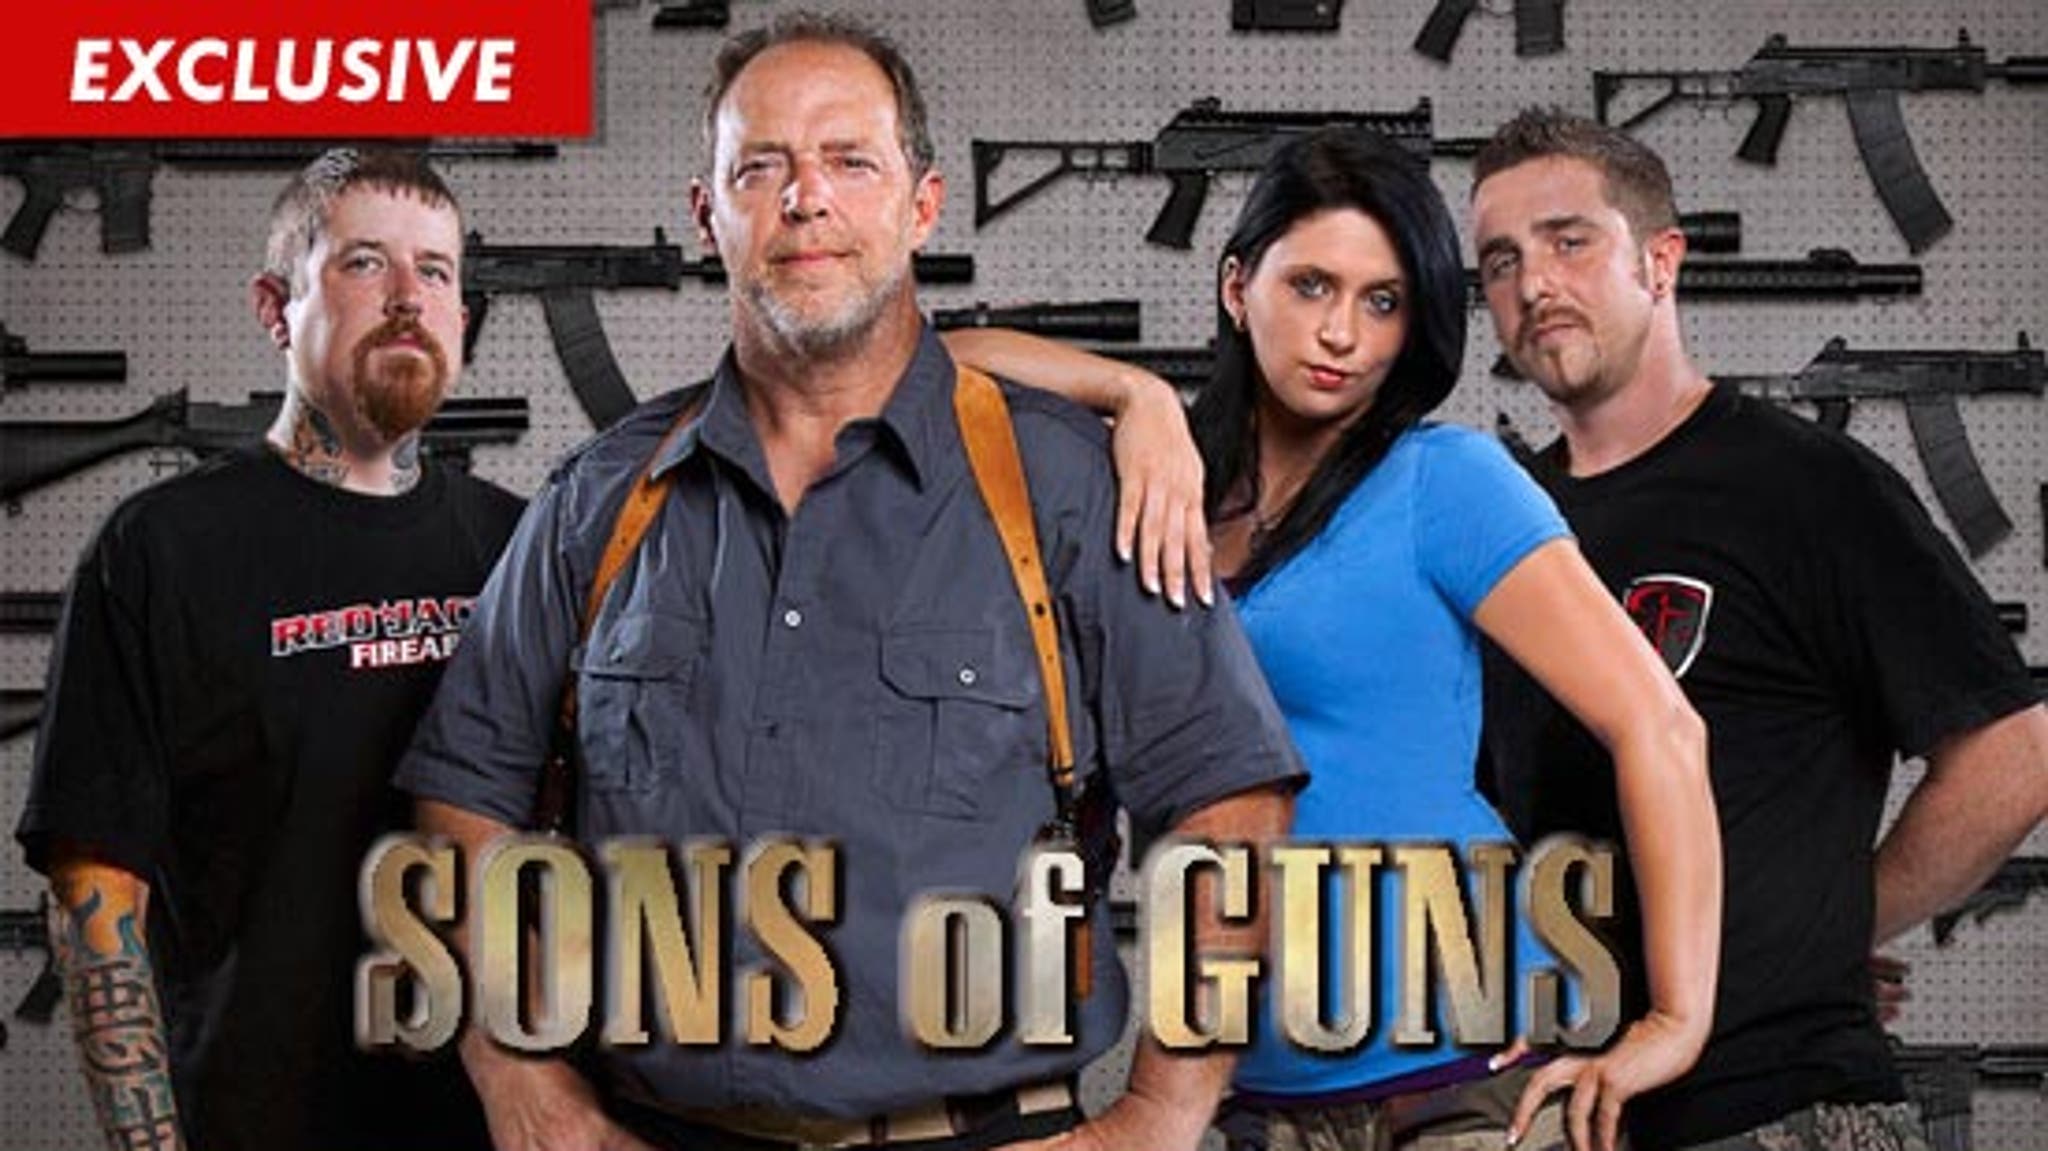 afbryde overskud Kyst Sons of Guns' Stars -- Punished By the Feds for MAJOR Firearms Violations